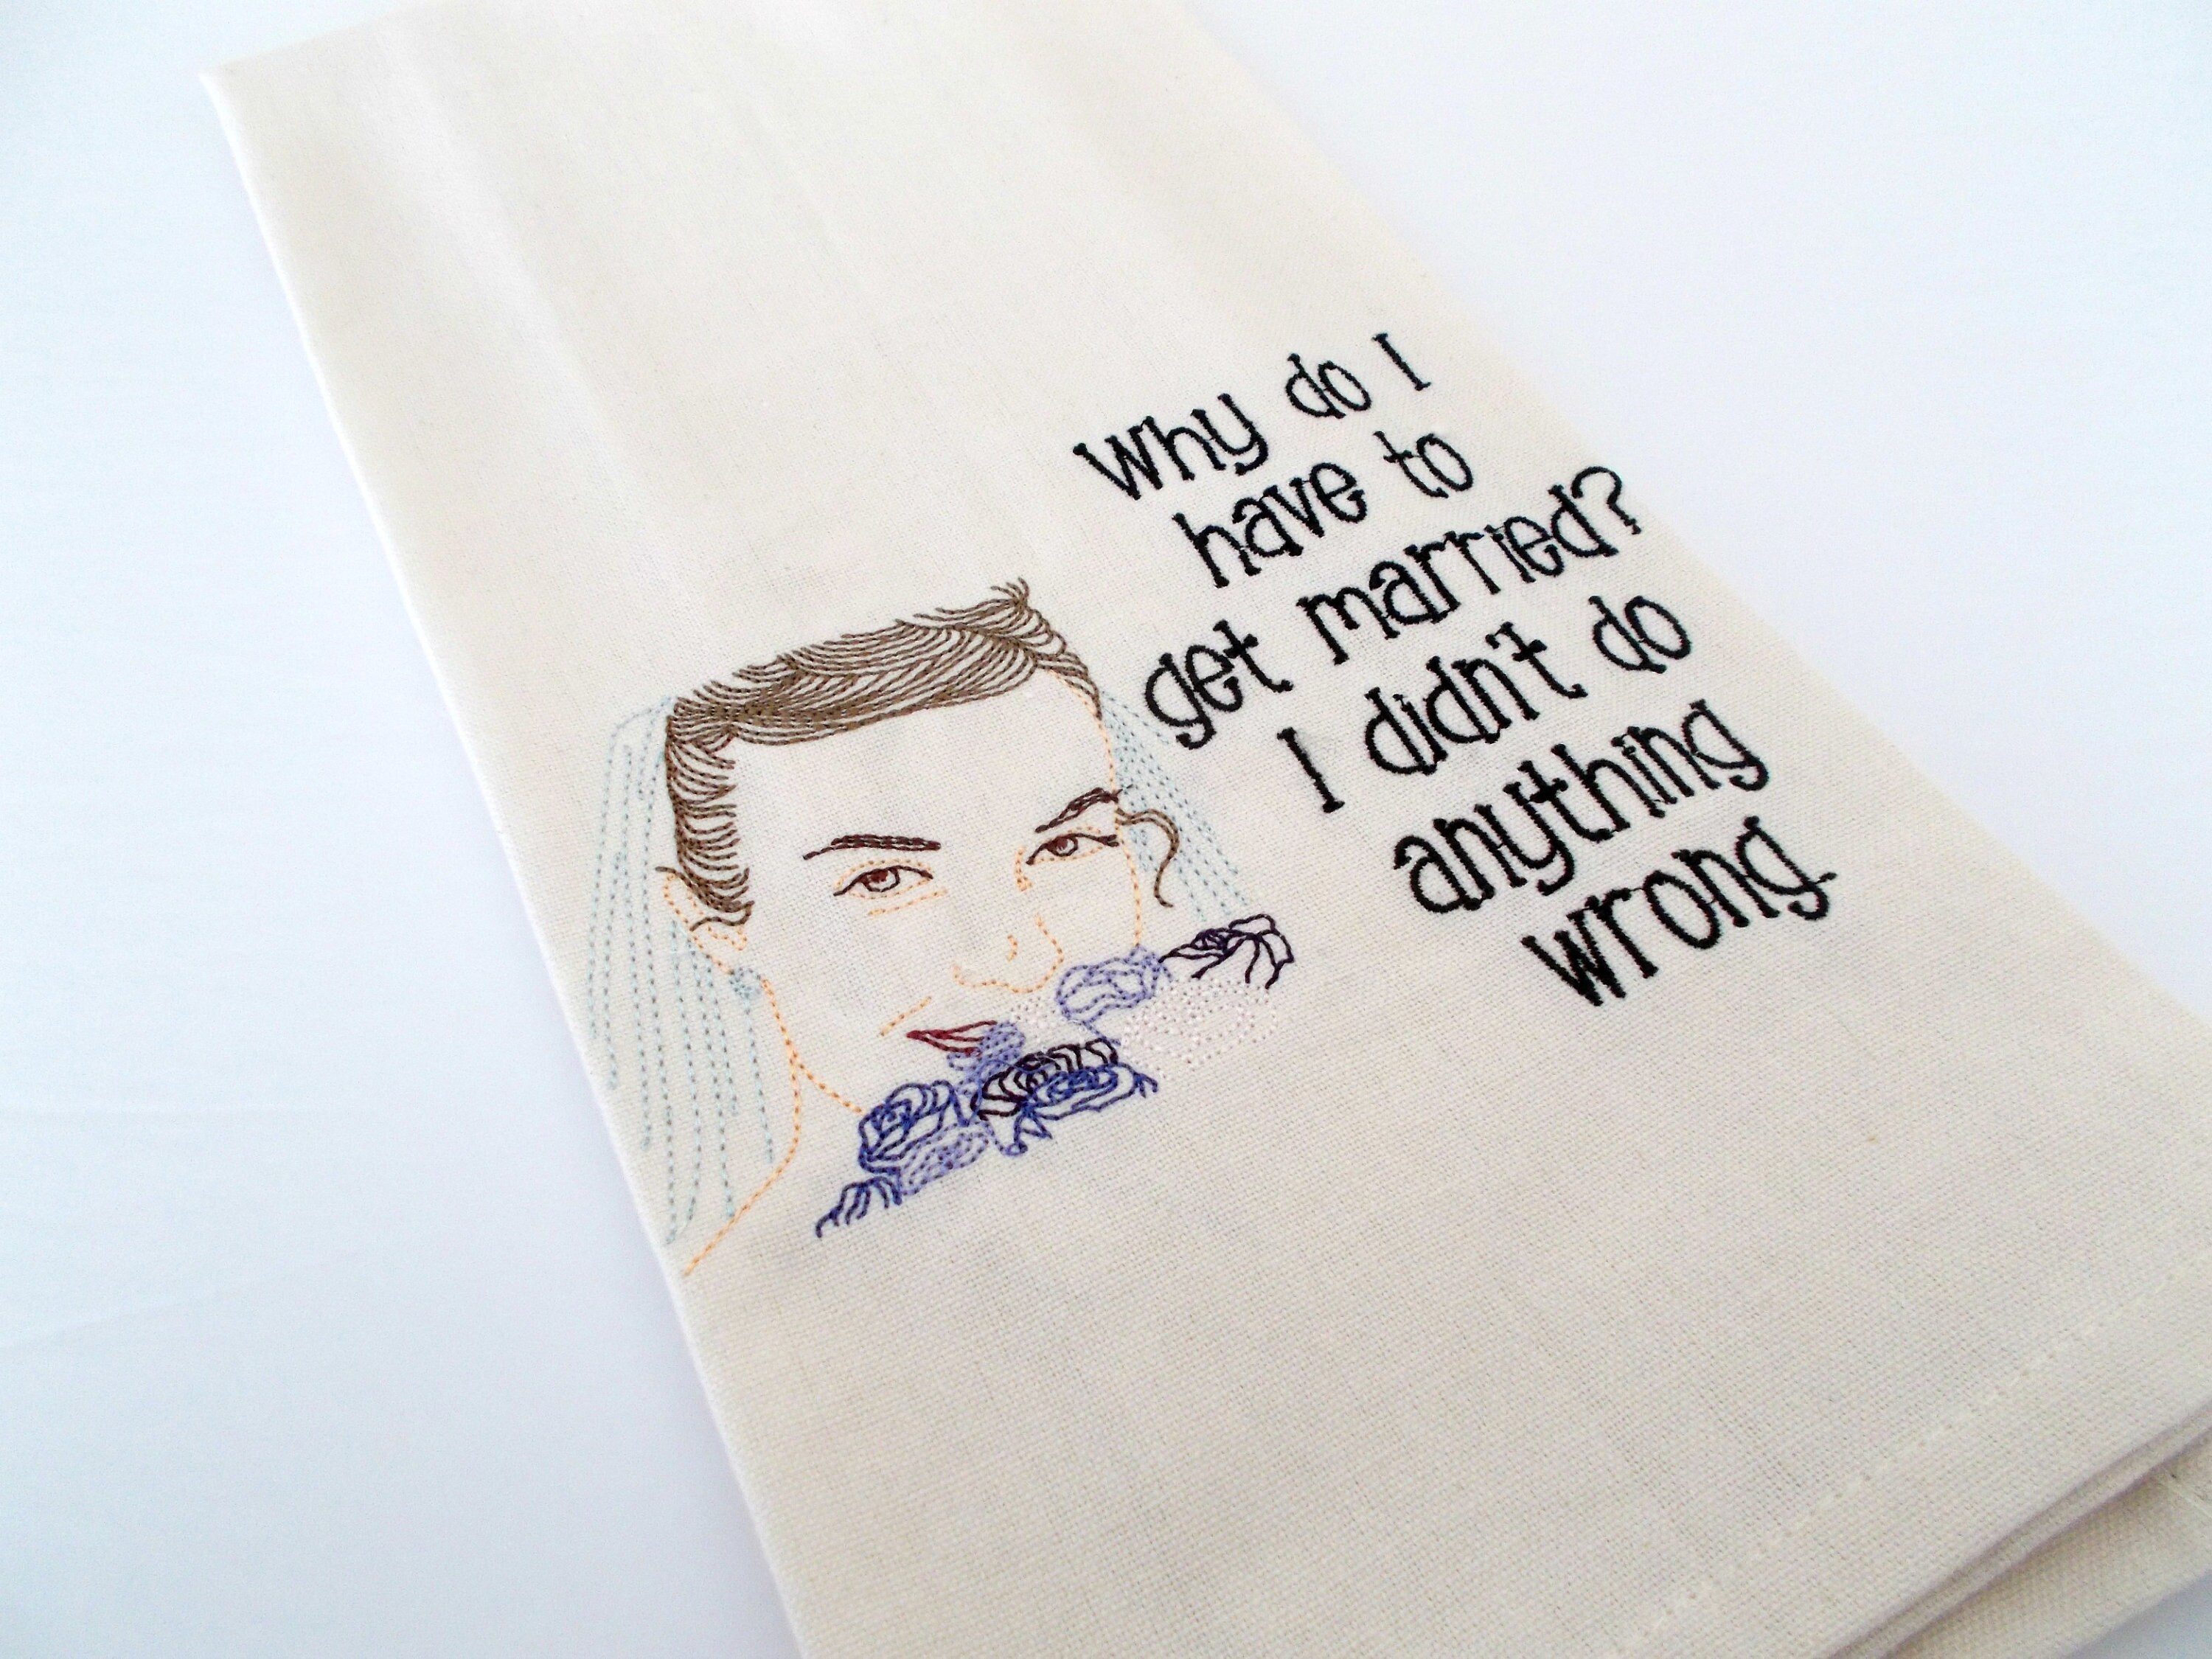 Sarcastic Kitchen Hand Towels, Clearance Sale, End of Year, Funny